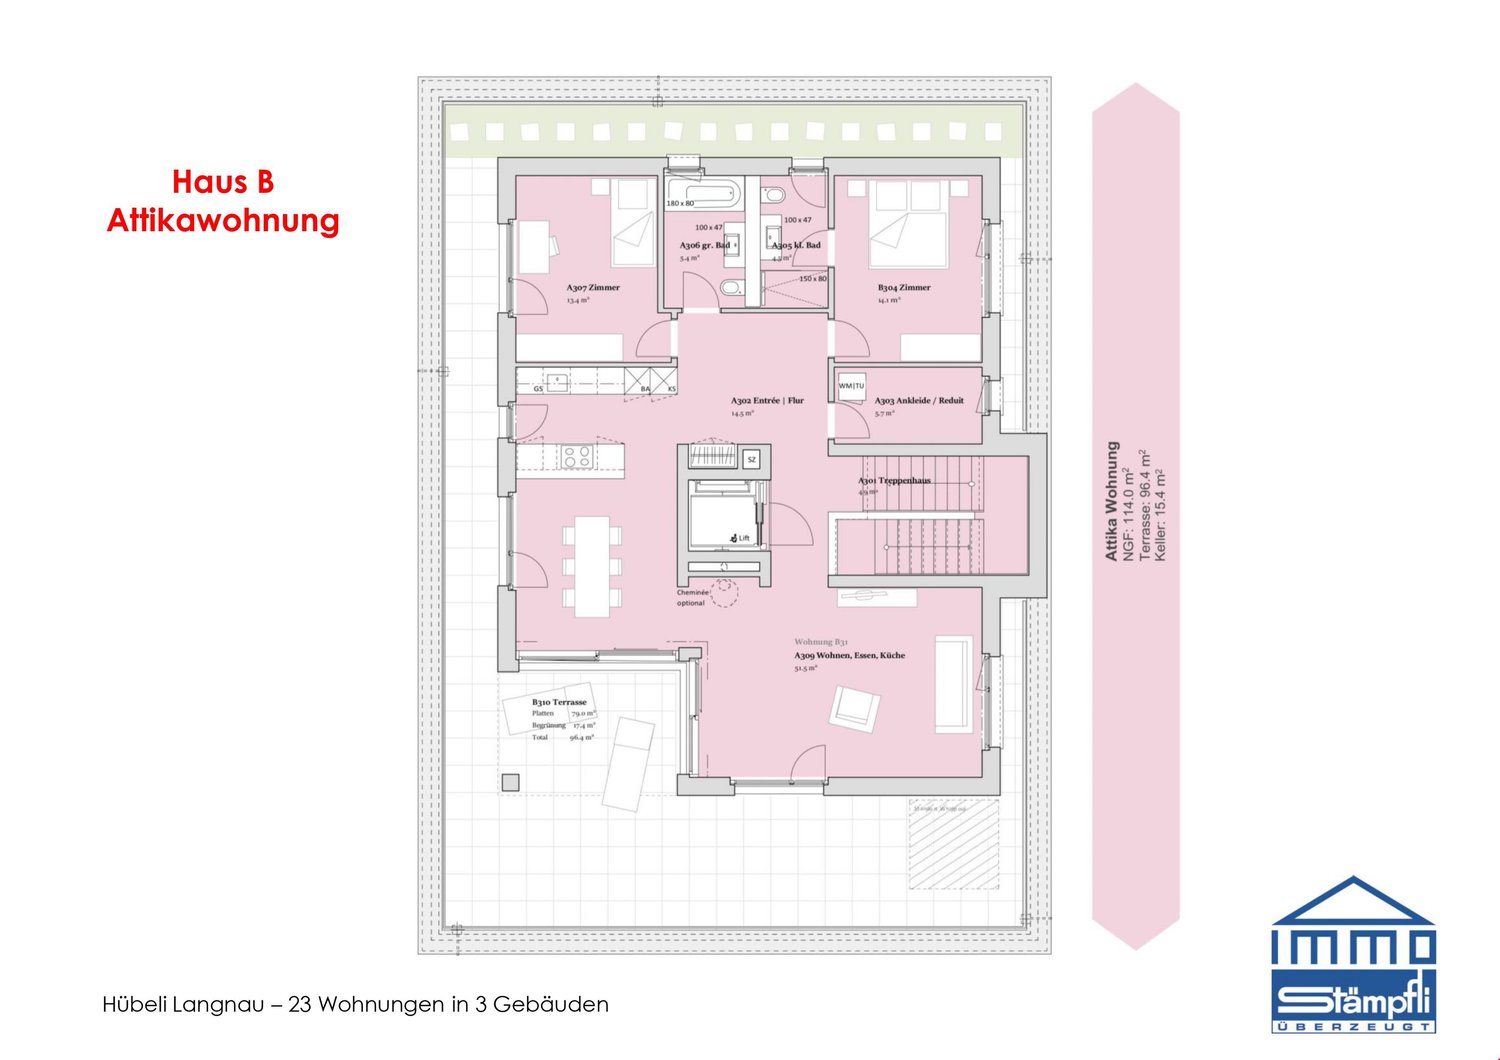 Page 7 - Apartment & house to buy in Region Emmental